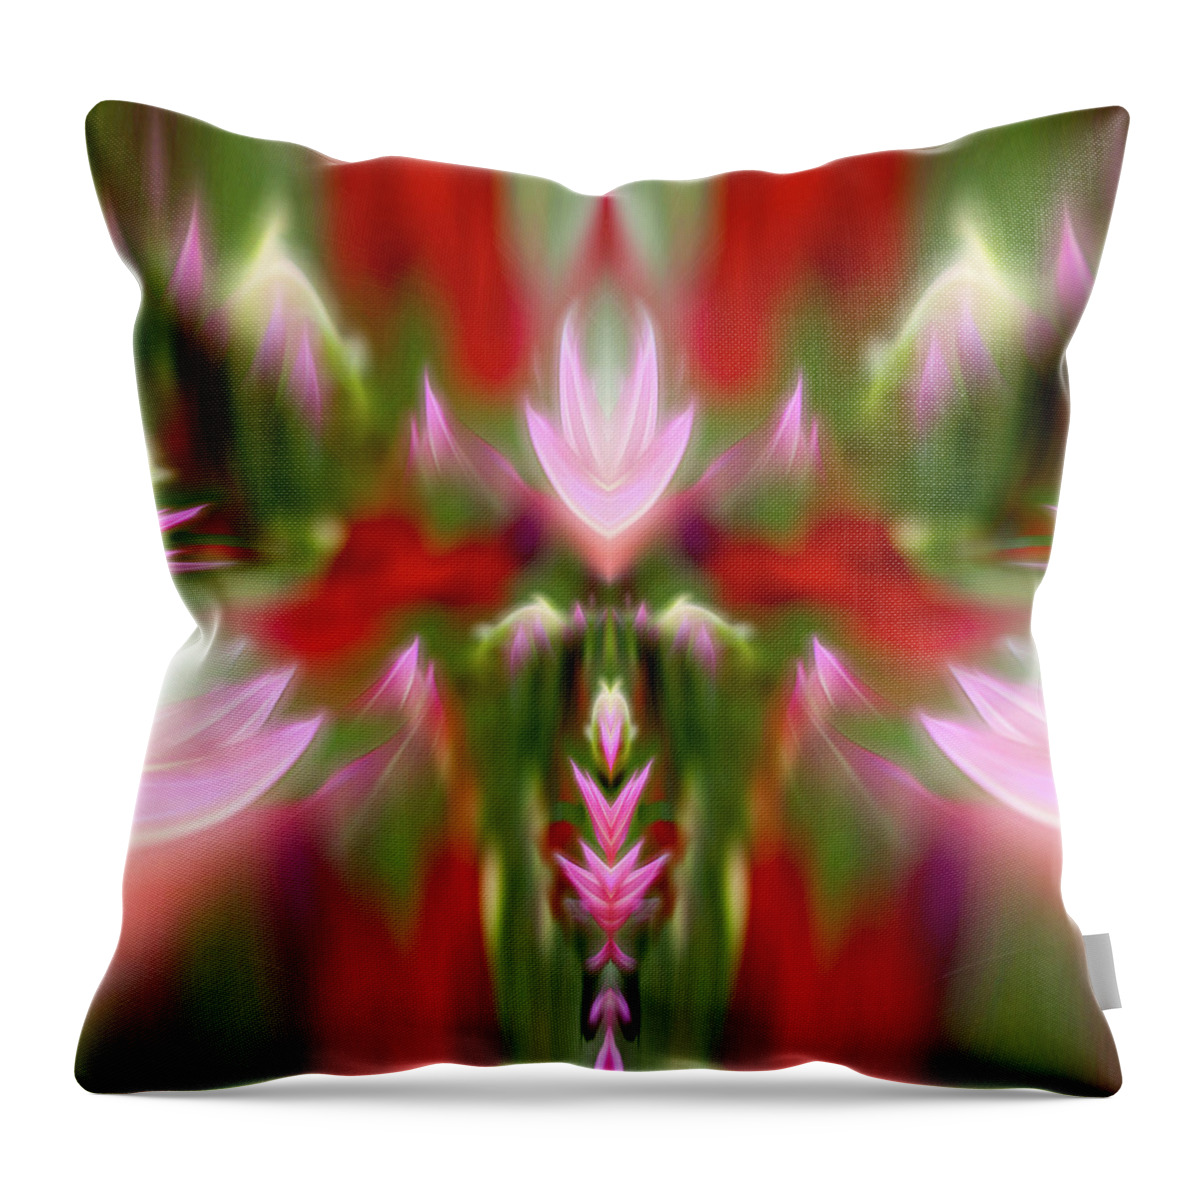 Landscape Throw Pillow featuring the photograph New Arrival 3 by Theodore Jones